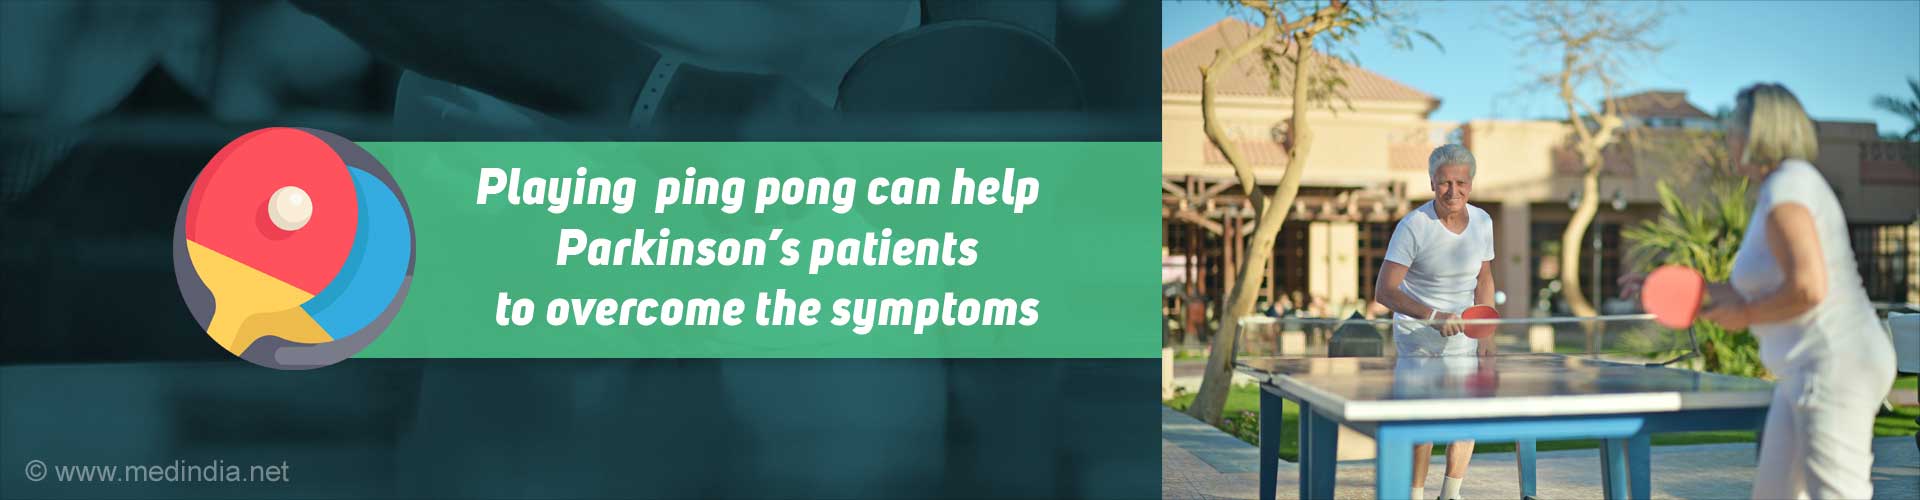 Playing ping pong can help Parkinson's patients to overcome the symptoms.